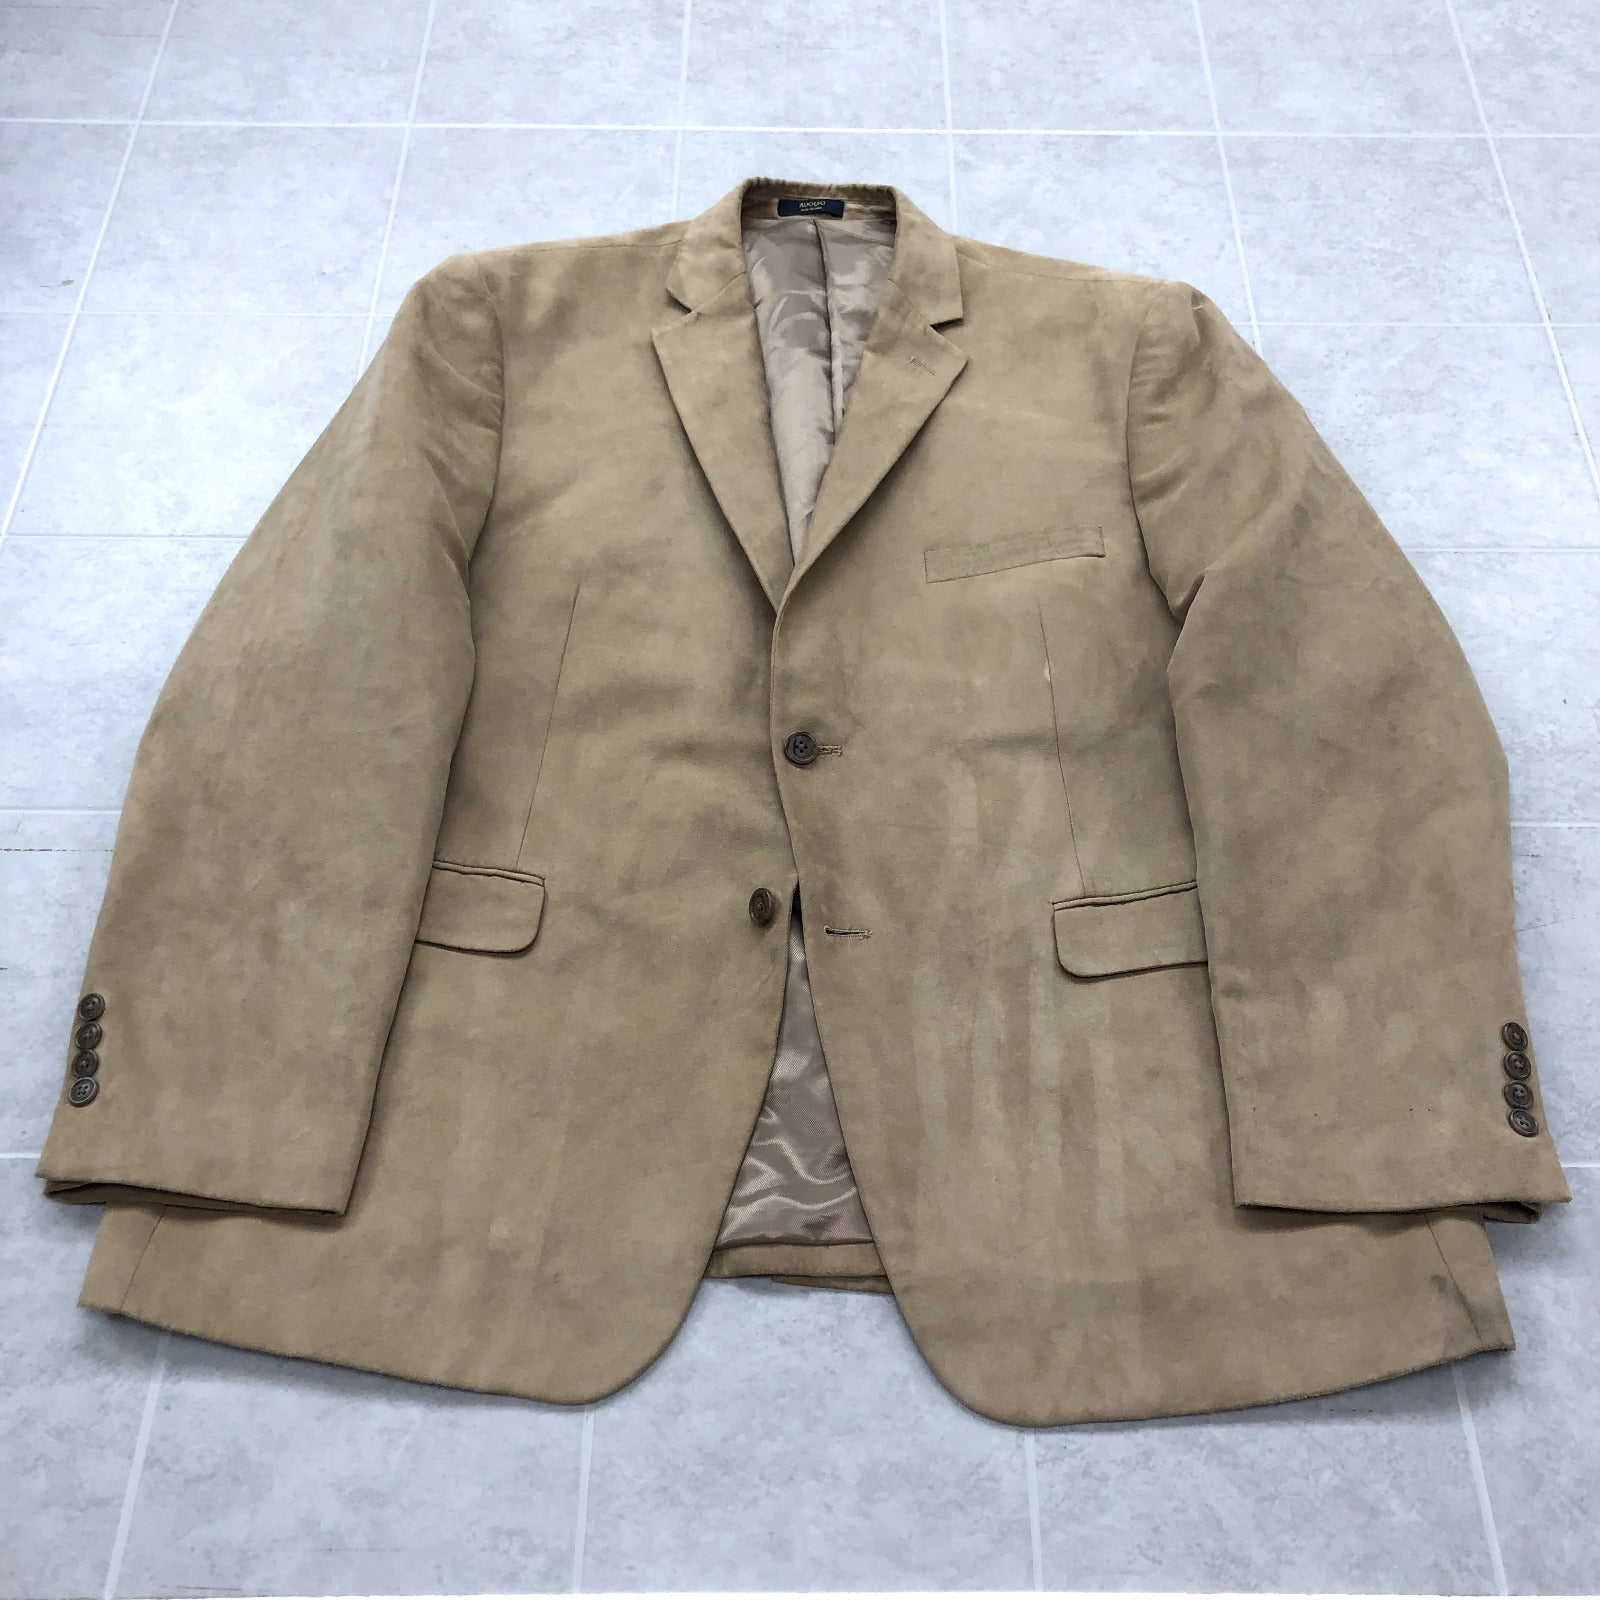 Adolfo Beige Lined Single Breasted Notch Lapel Suede Blazer Adult Size 48R